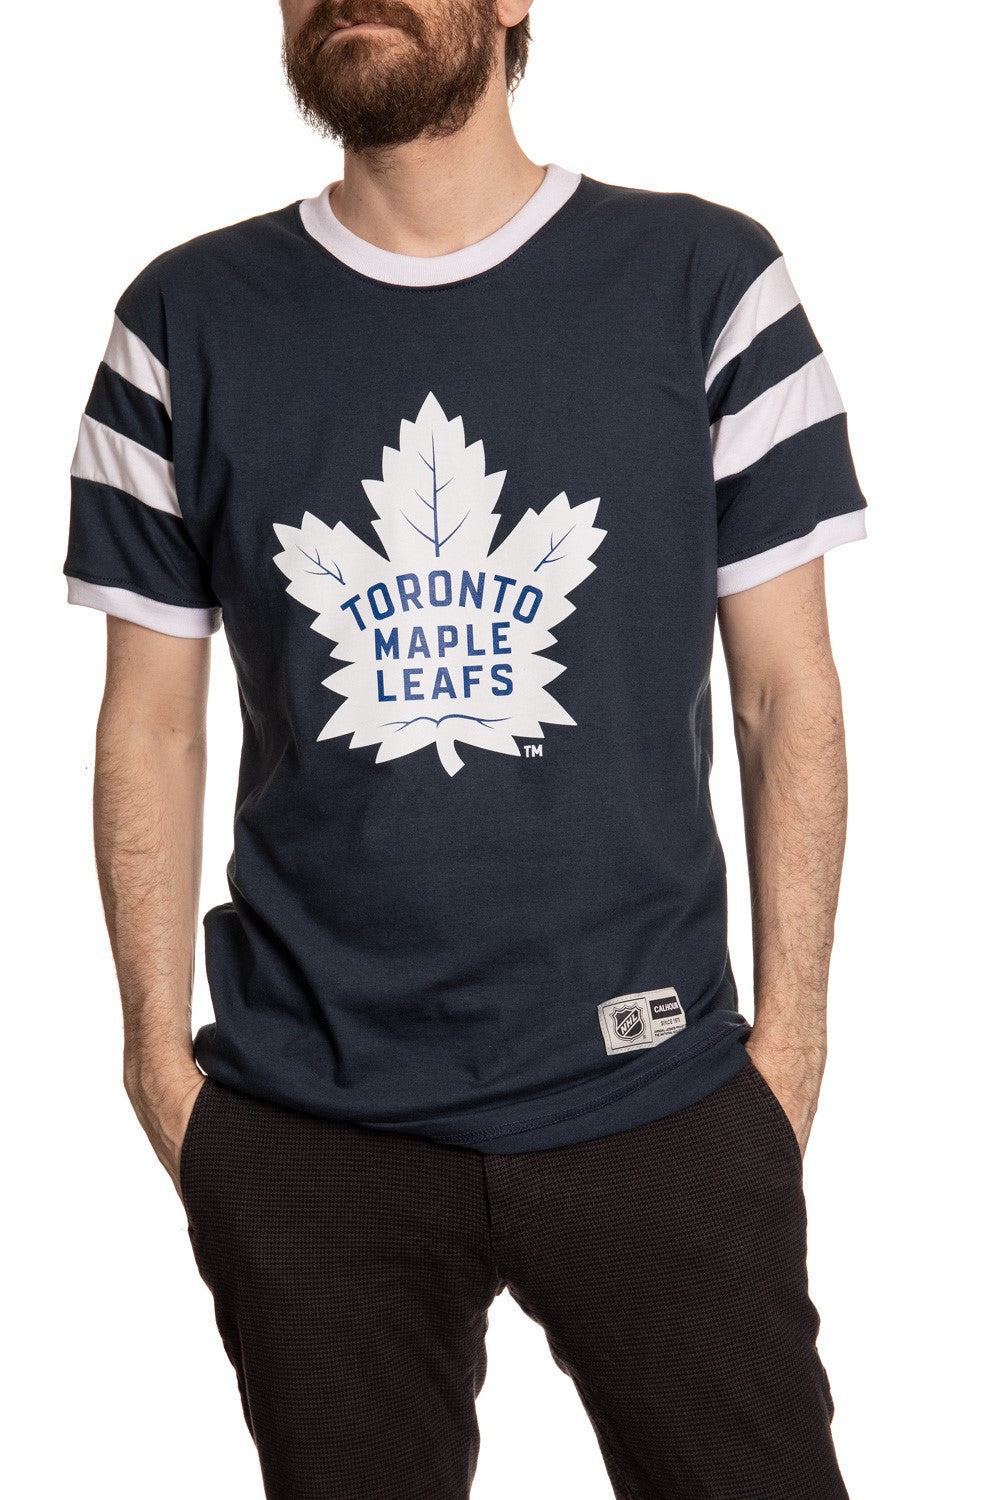 Toronto Maple Leafs Varsity T-Shirt Front View